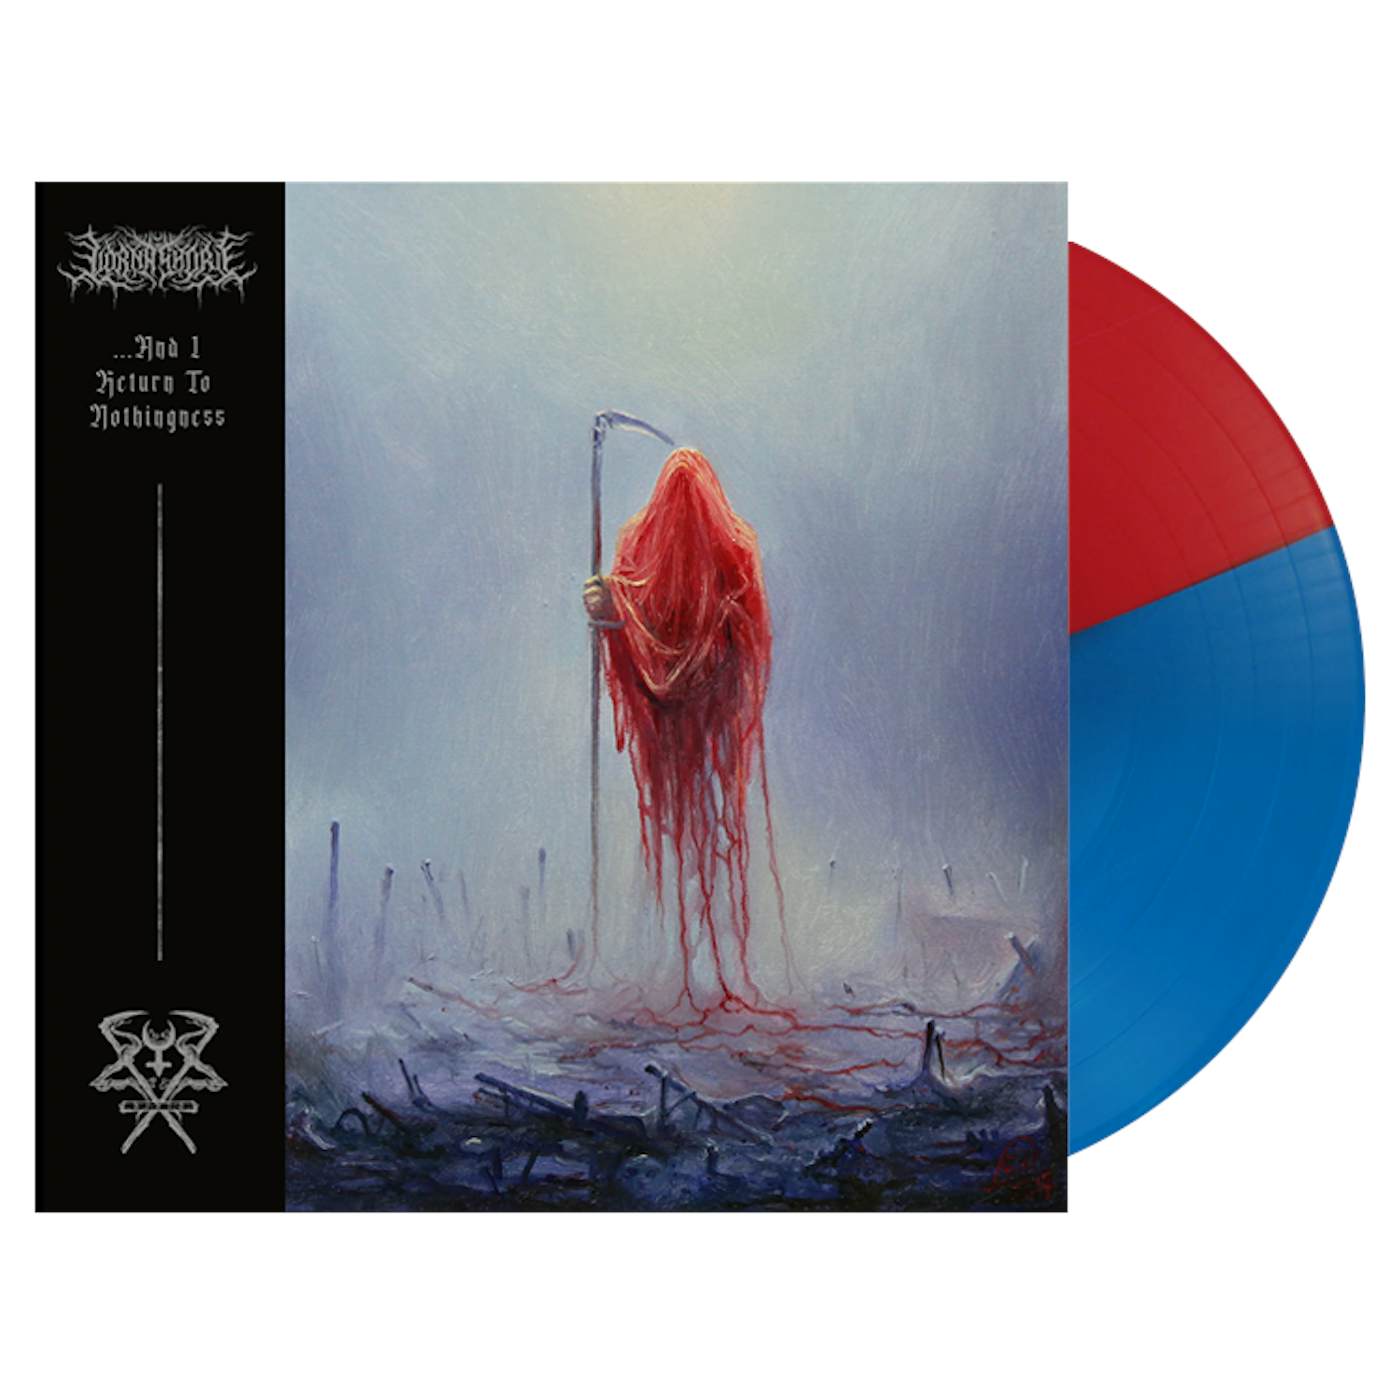 LORNA SHORE- '...And I Return To Nothingness' LP (Sky Blue/Red) (Vinyl)